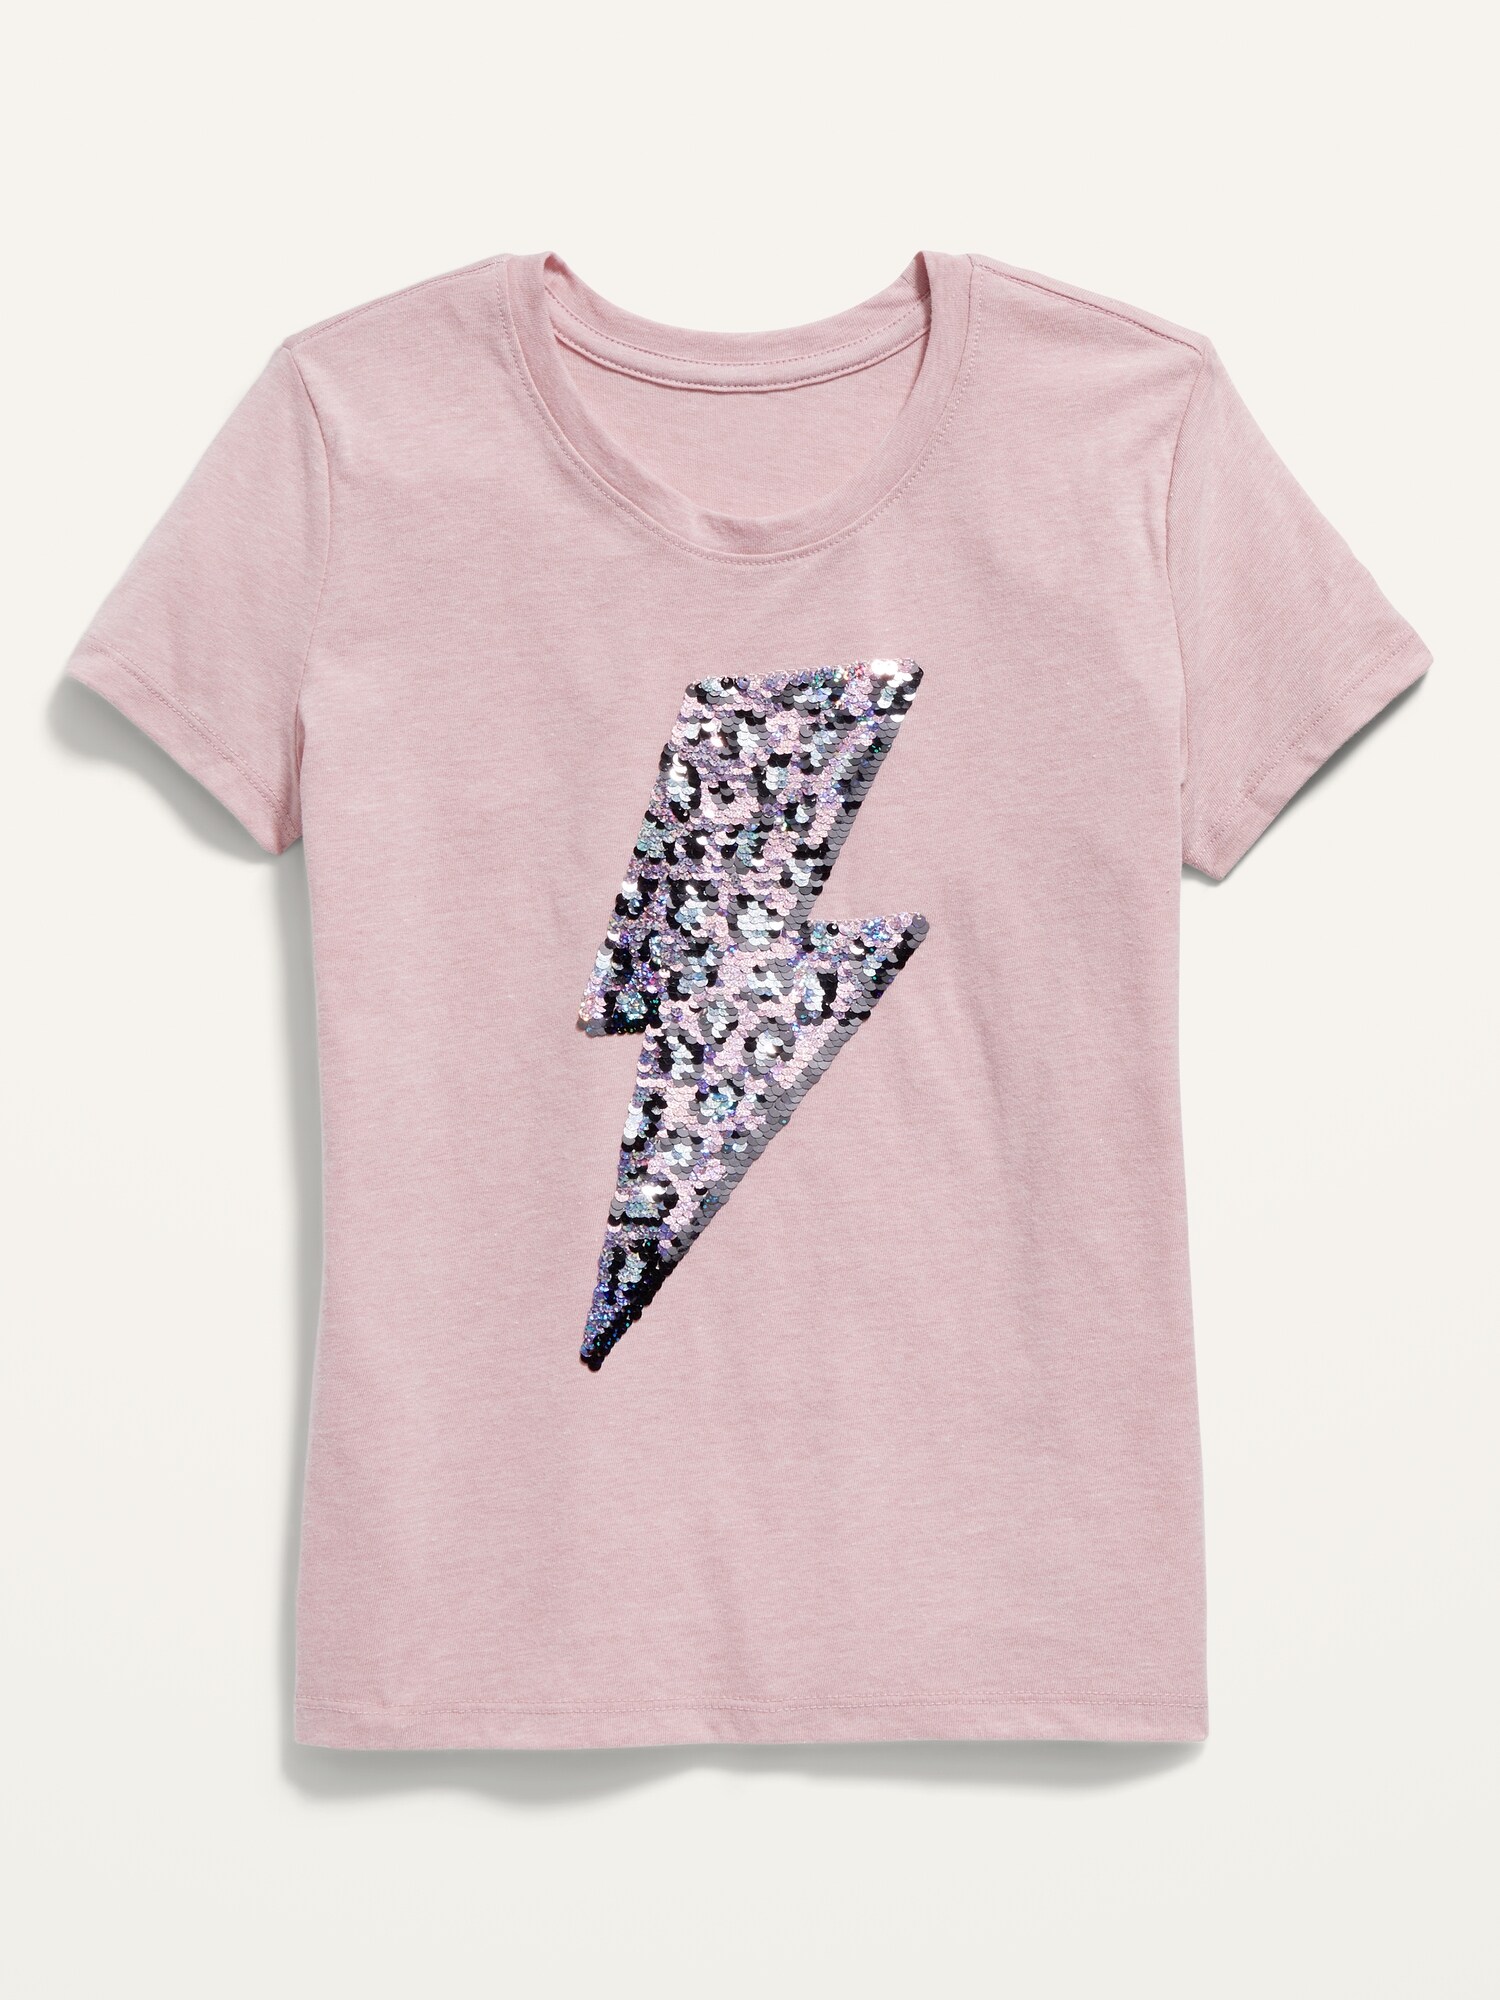 Flippy-Sequin Graphic Tee for Girls | Old Navy